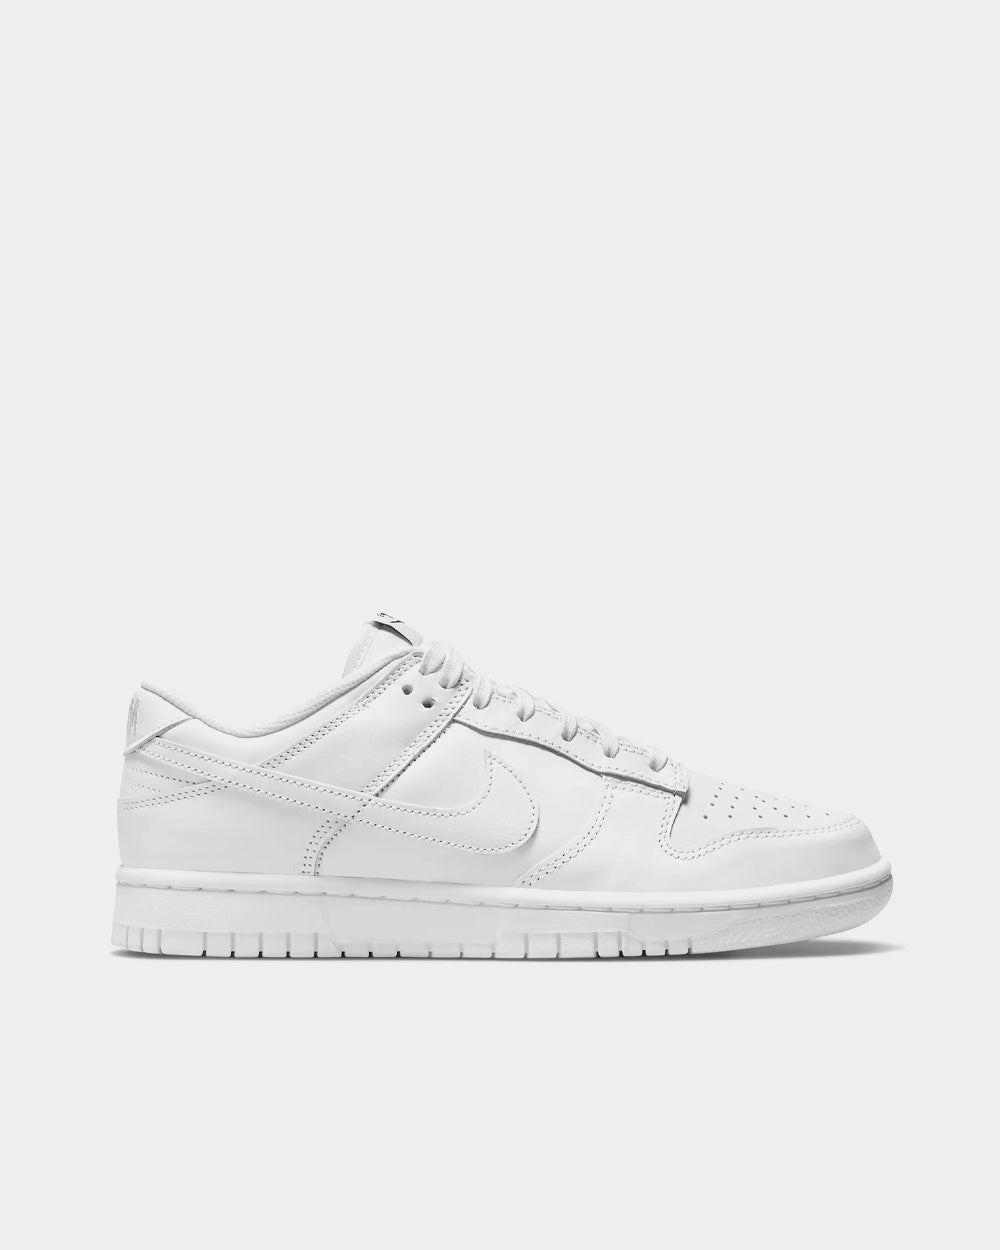 Nike Dunk Low White / White / Medium Olive Low Top Sneakers - Sneak in Peace